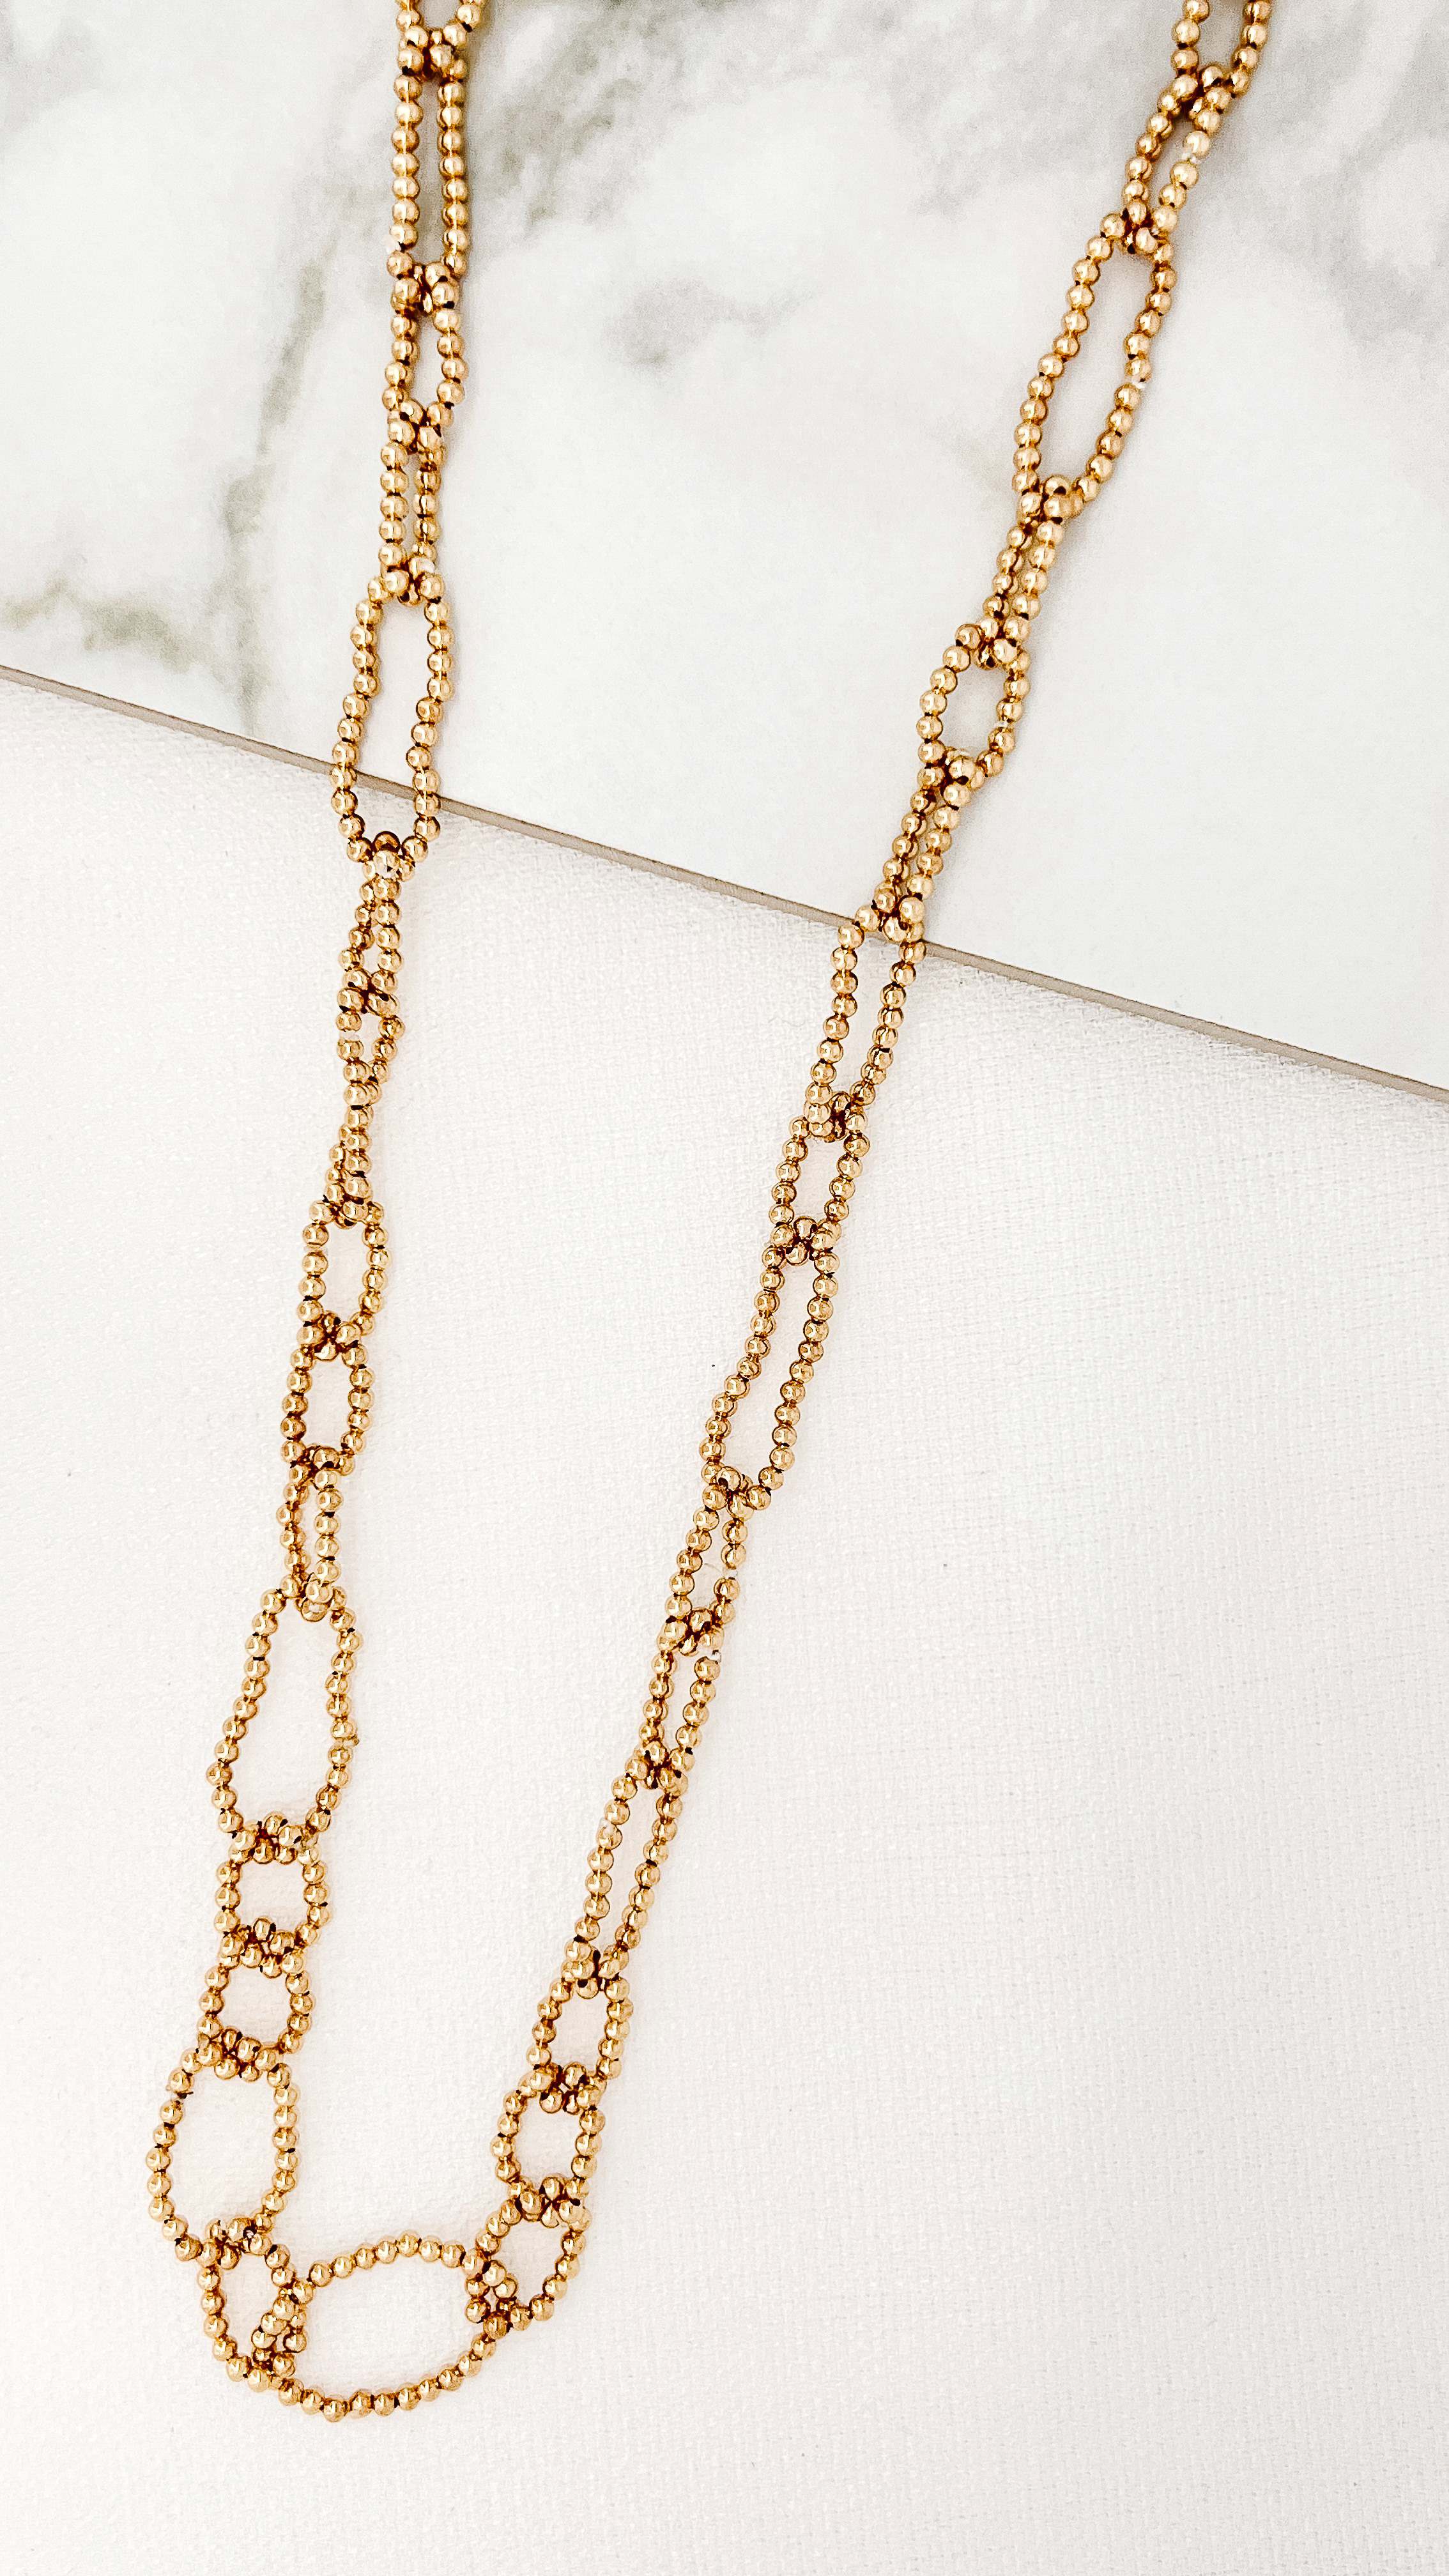 Women Kpop Big Name Layers Strand Long Necklace Shiny Crystal Beads Sweater  Chain New Joker Neck Decoration